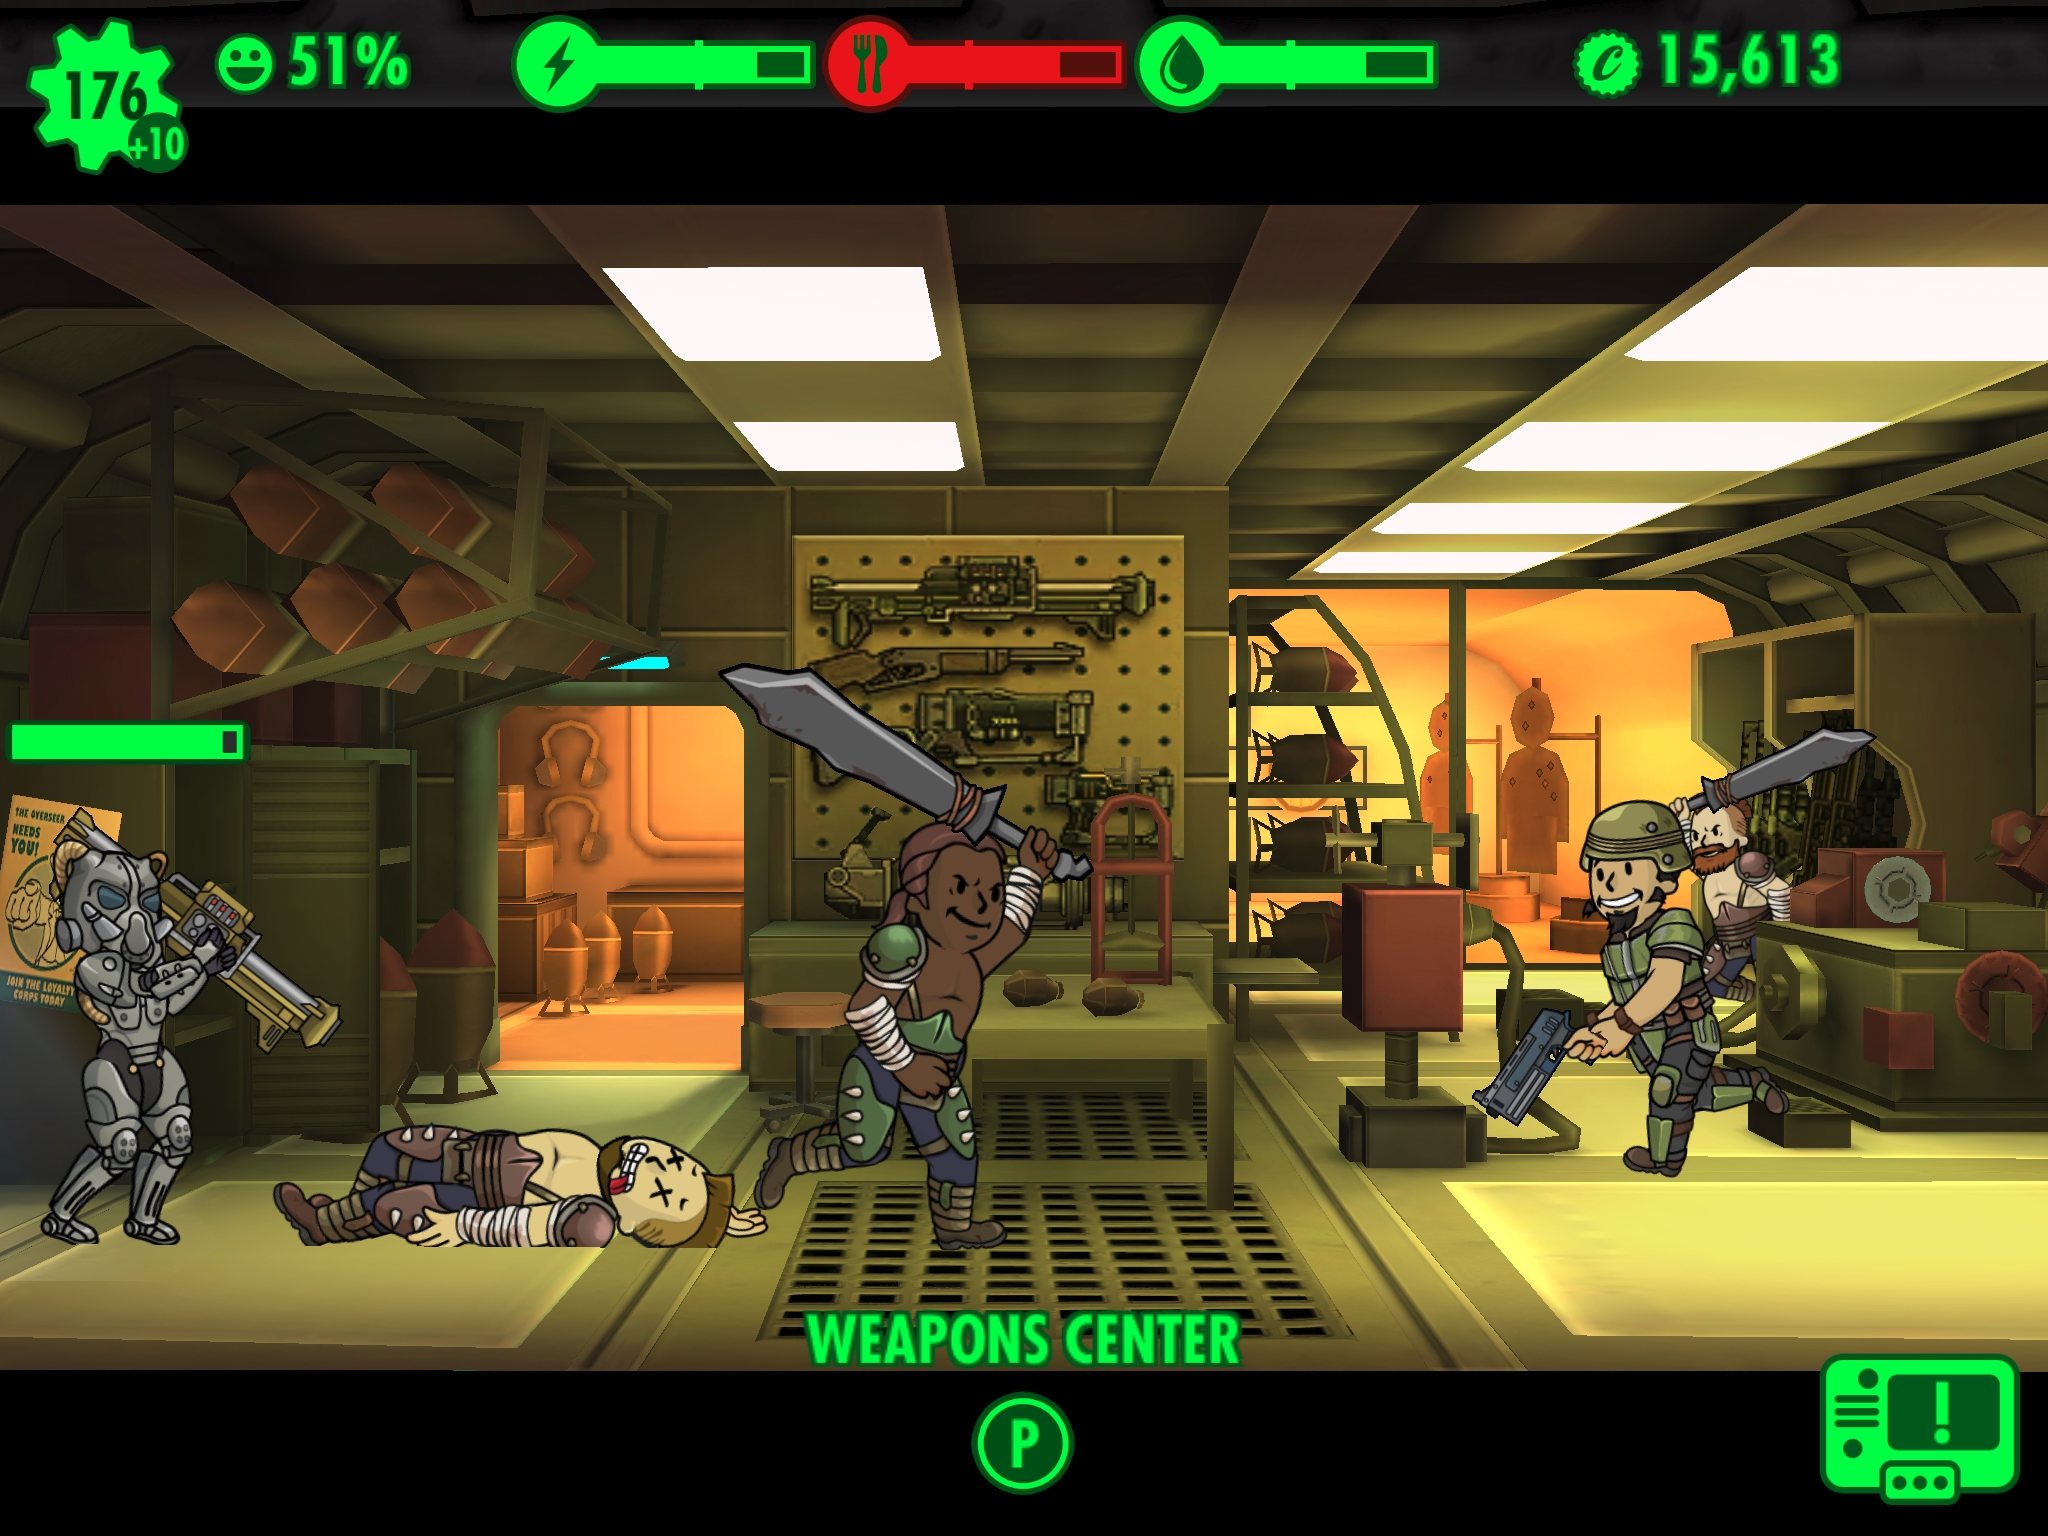 play fallout shelter online pc